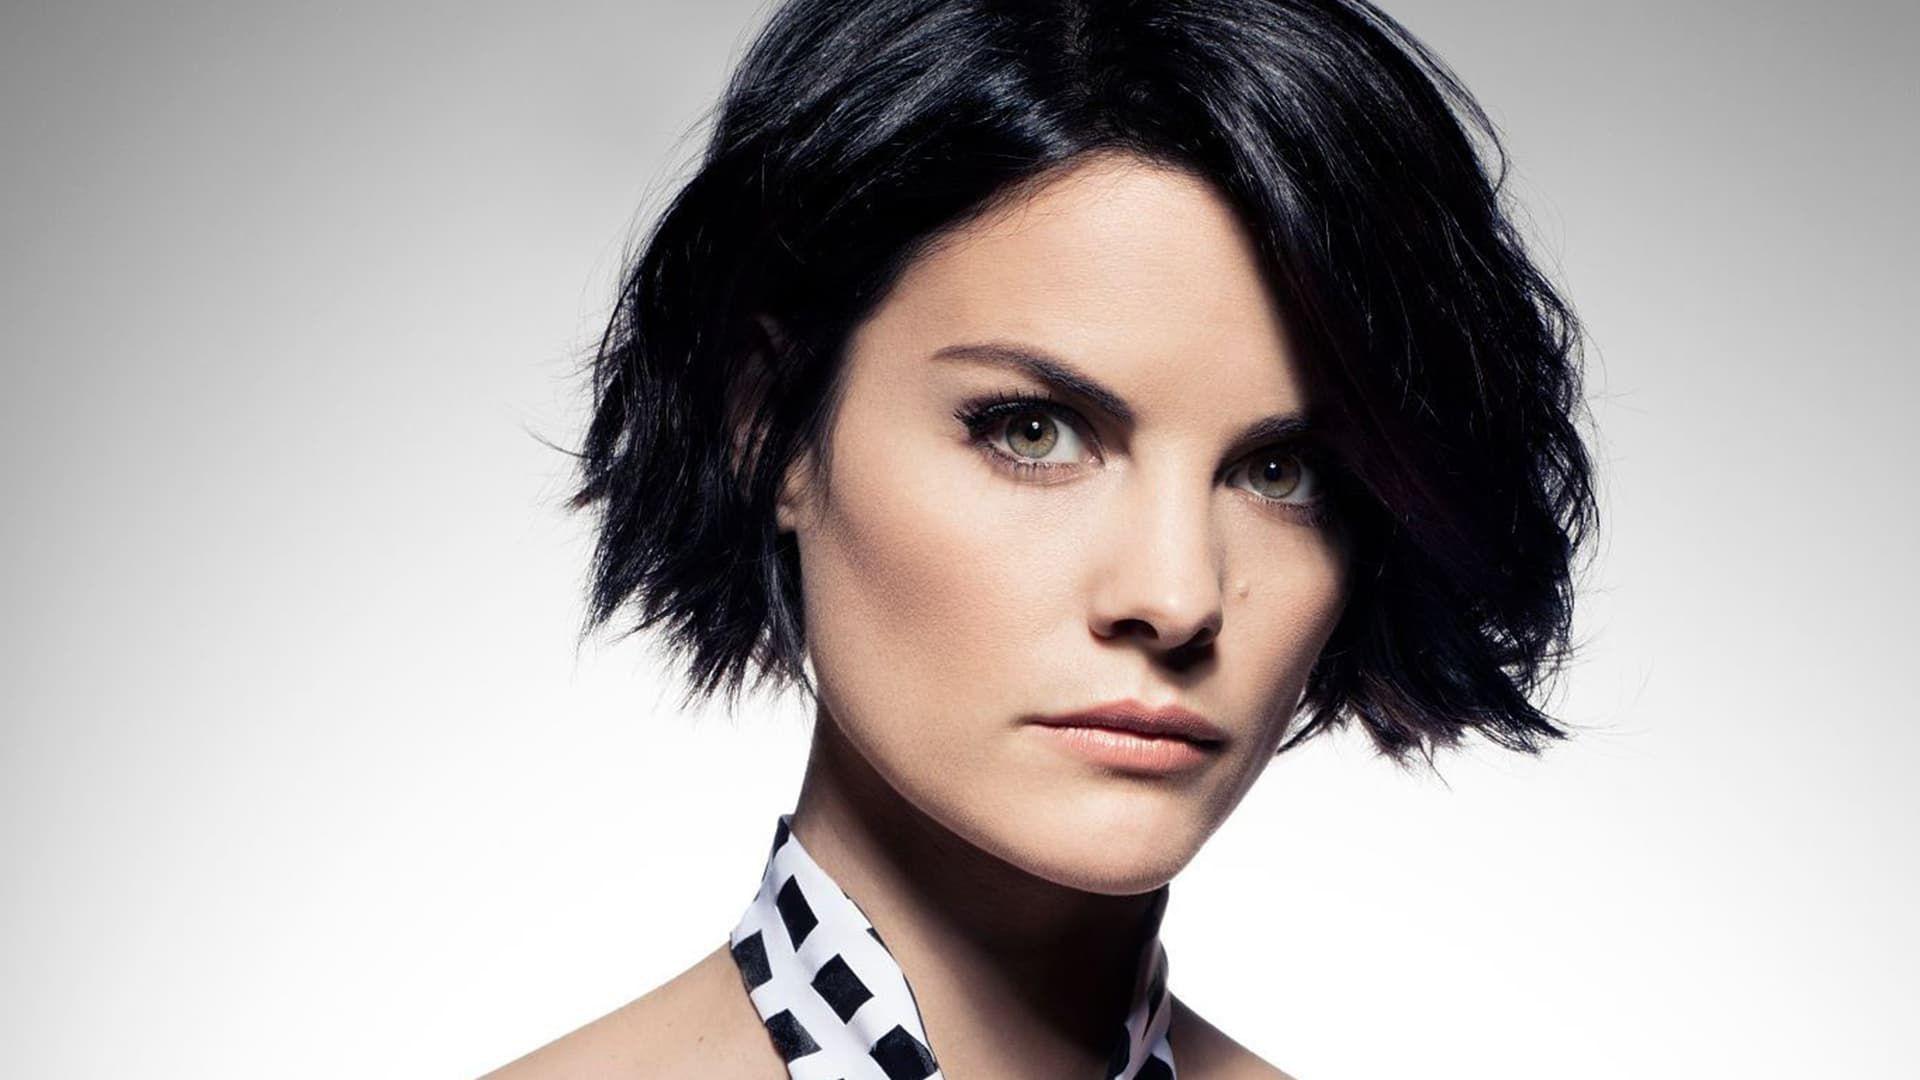 Jaimie Alexander Wallpaper Image Photo Picture Background